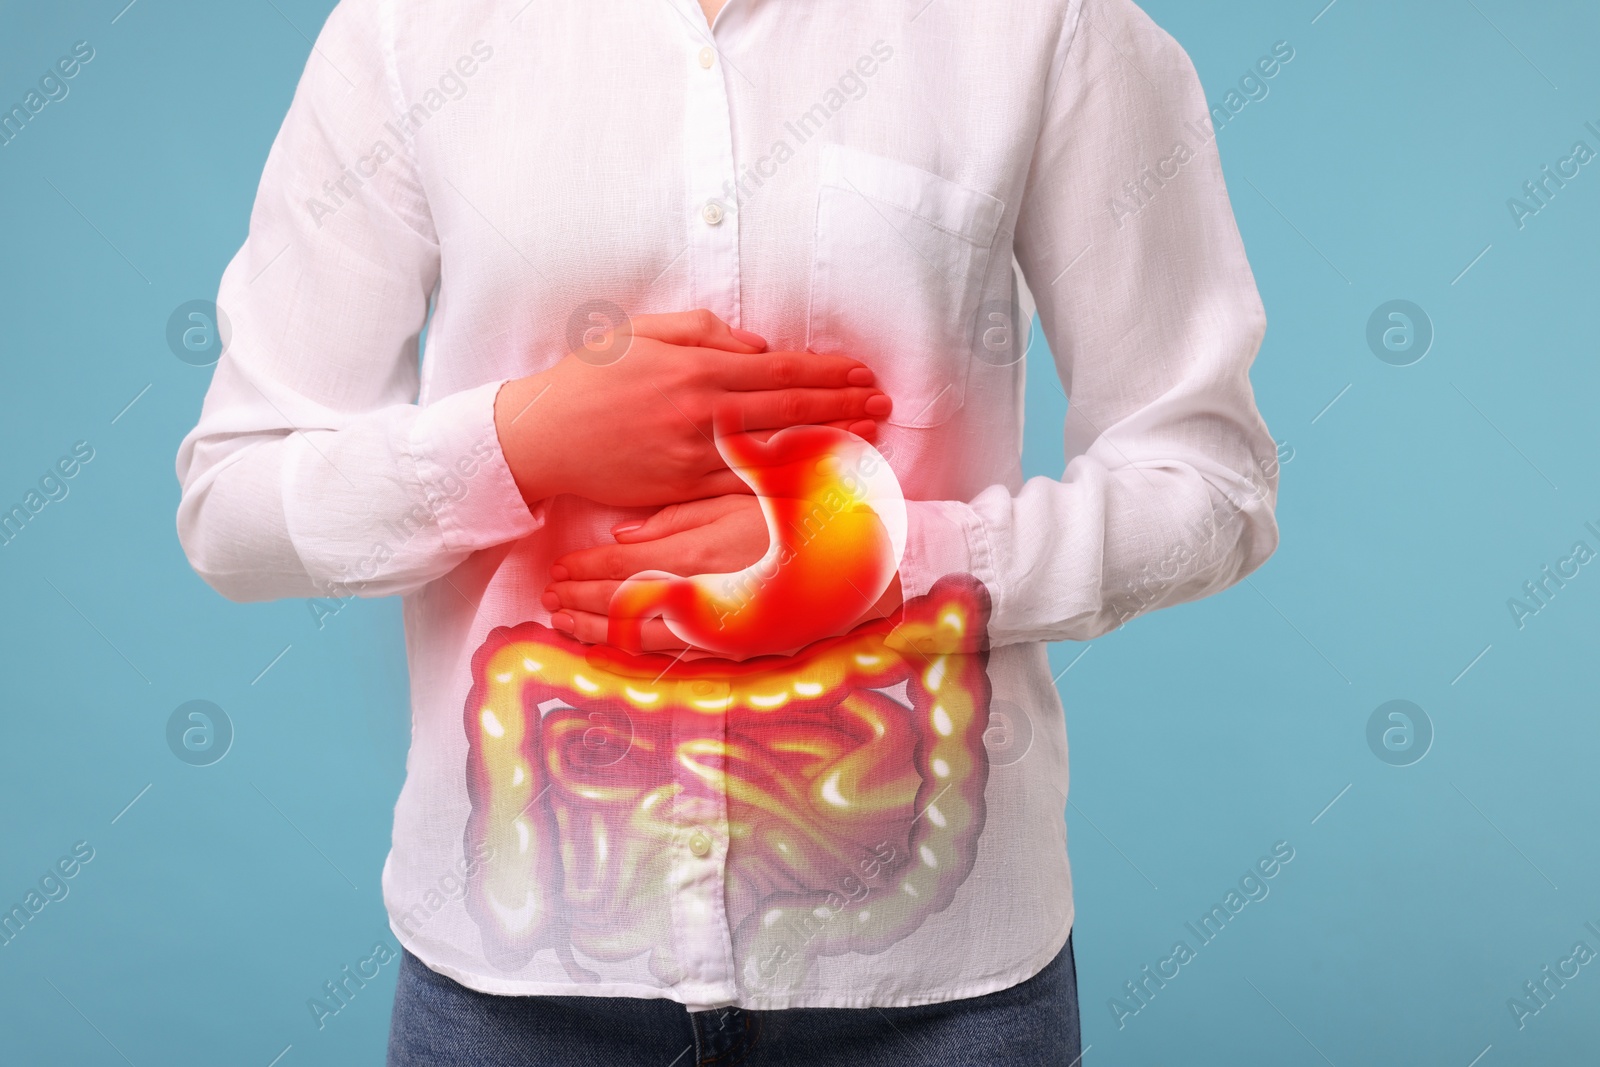 Image of Woman suffering from stomach ache on light blue background, closeup. Illustration of unhealthy gastrointestinal tract